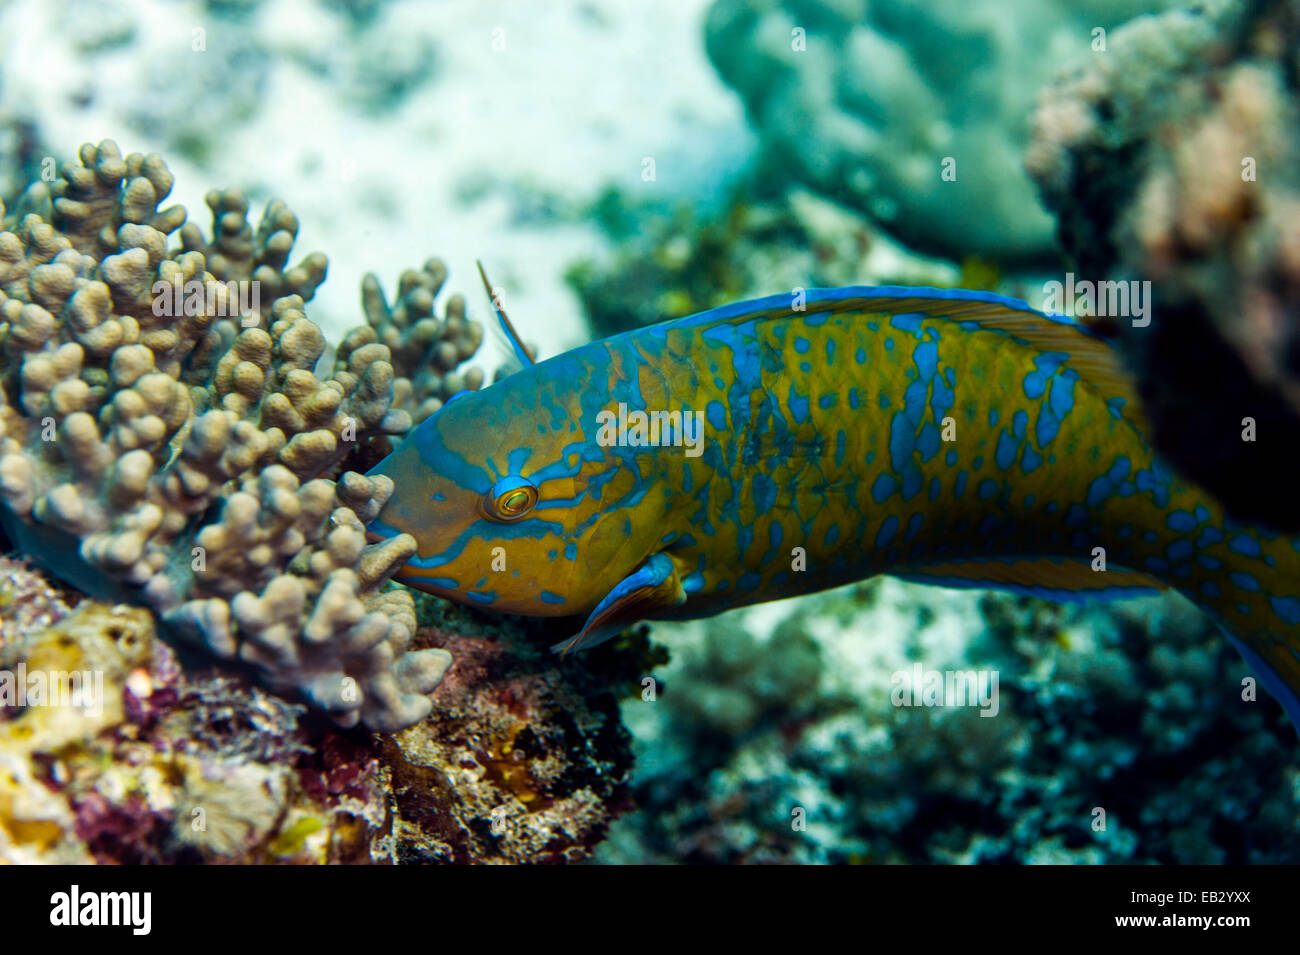 A Blue-barred Parrotfish feeding on a tropical coral reef using it's hard pointed beak. Stock Photo